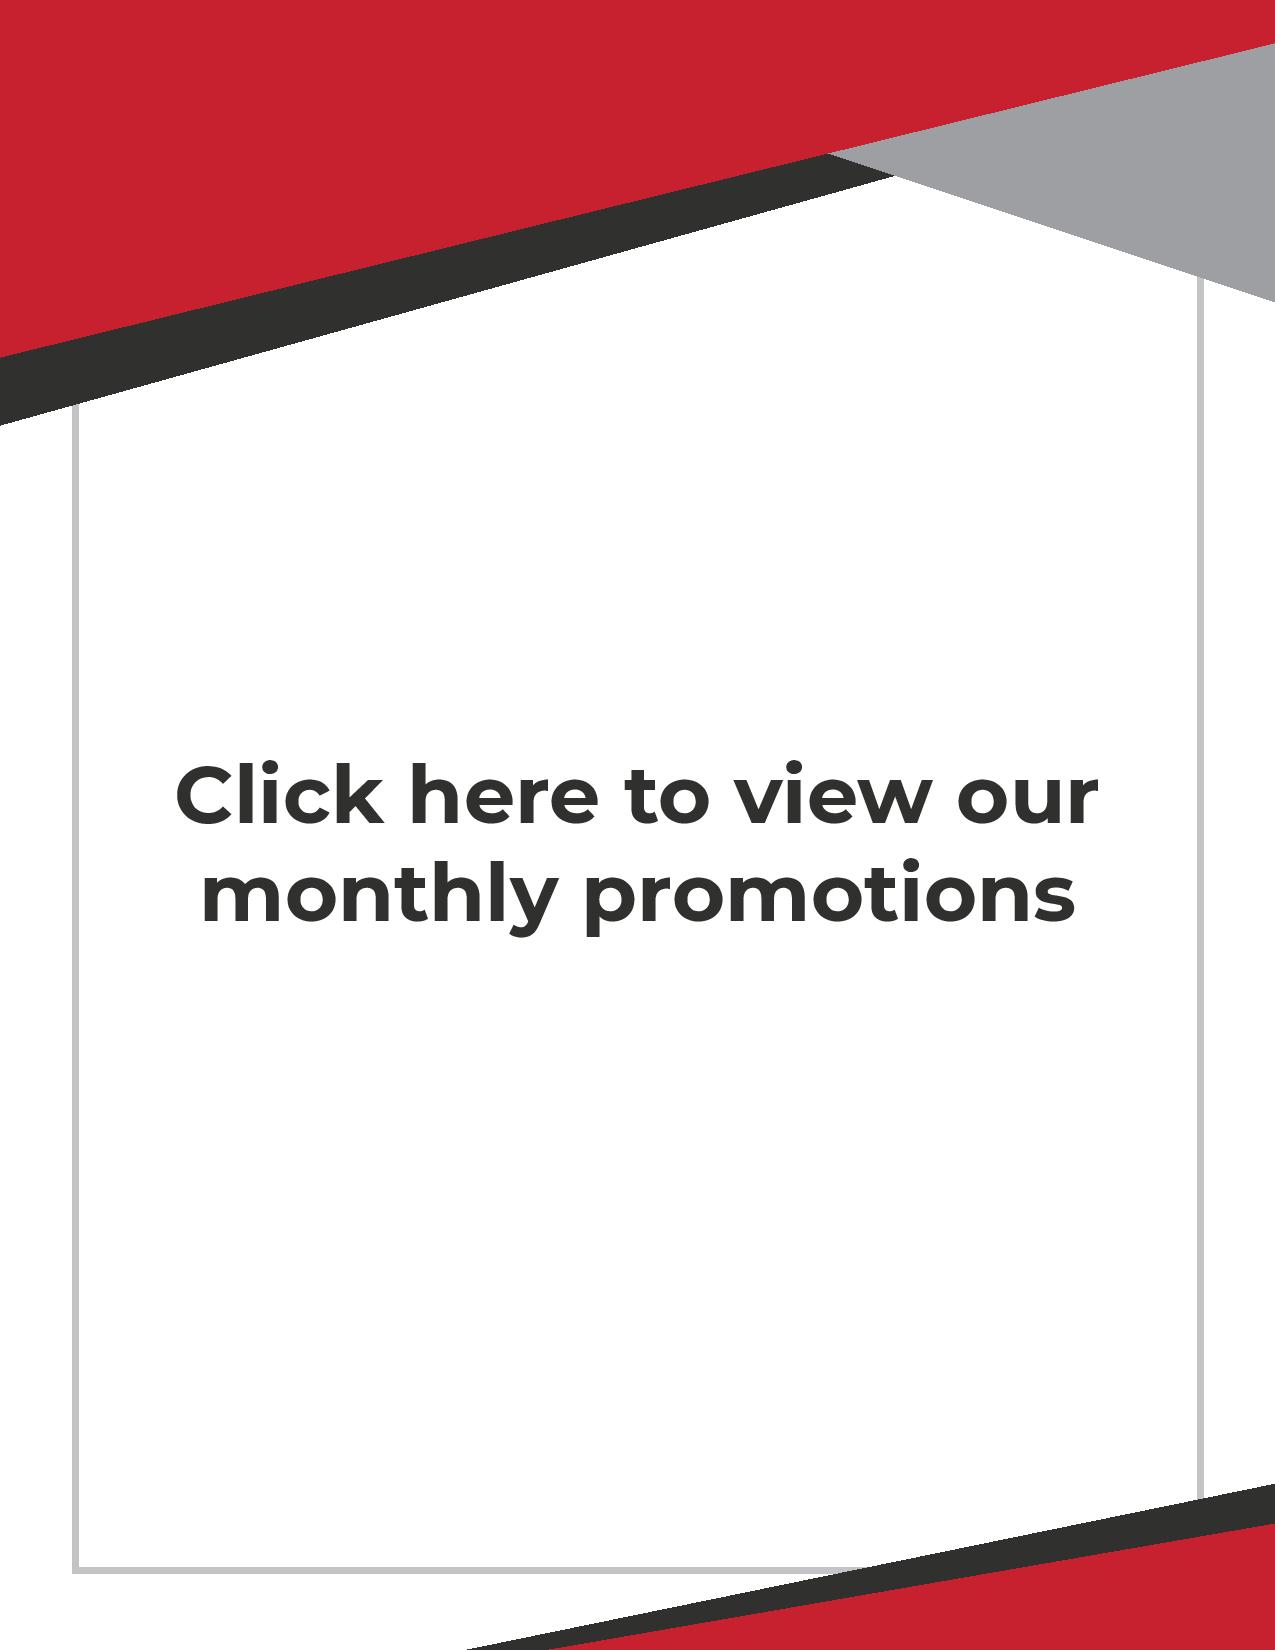 Check out these January monthly promotions image